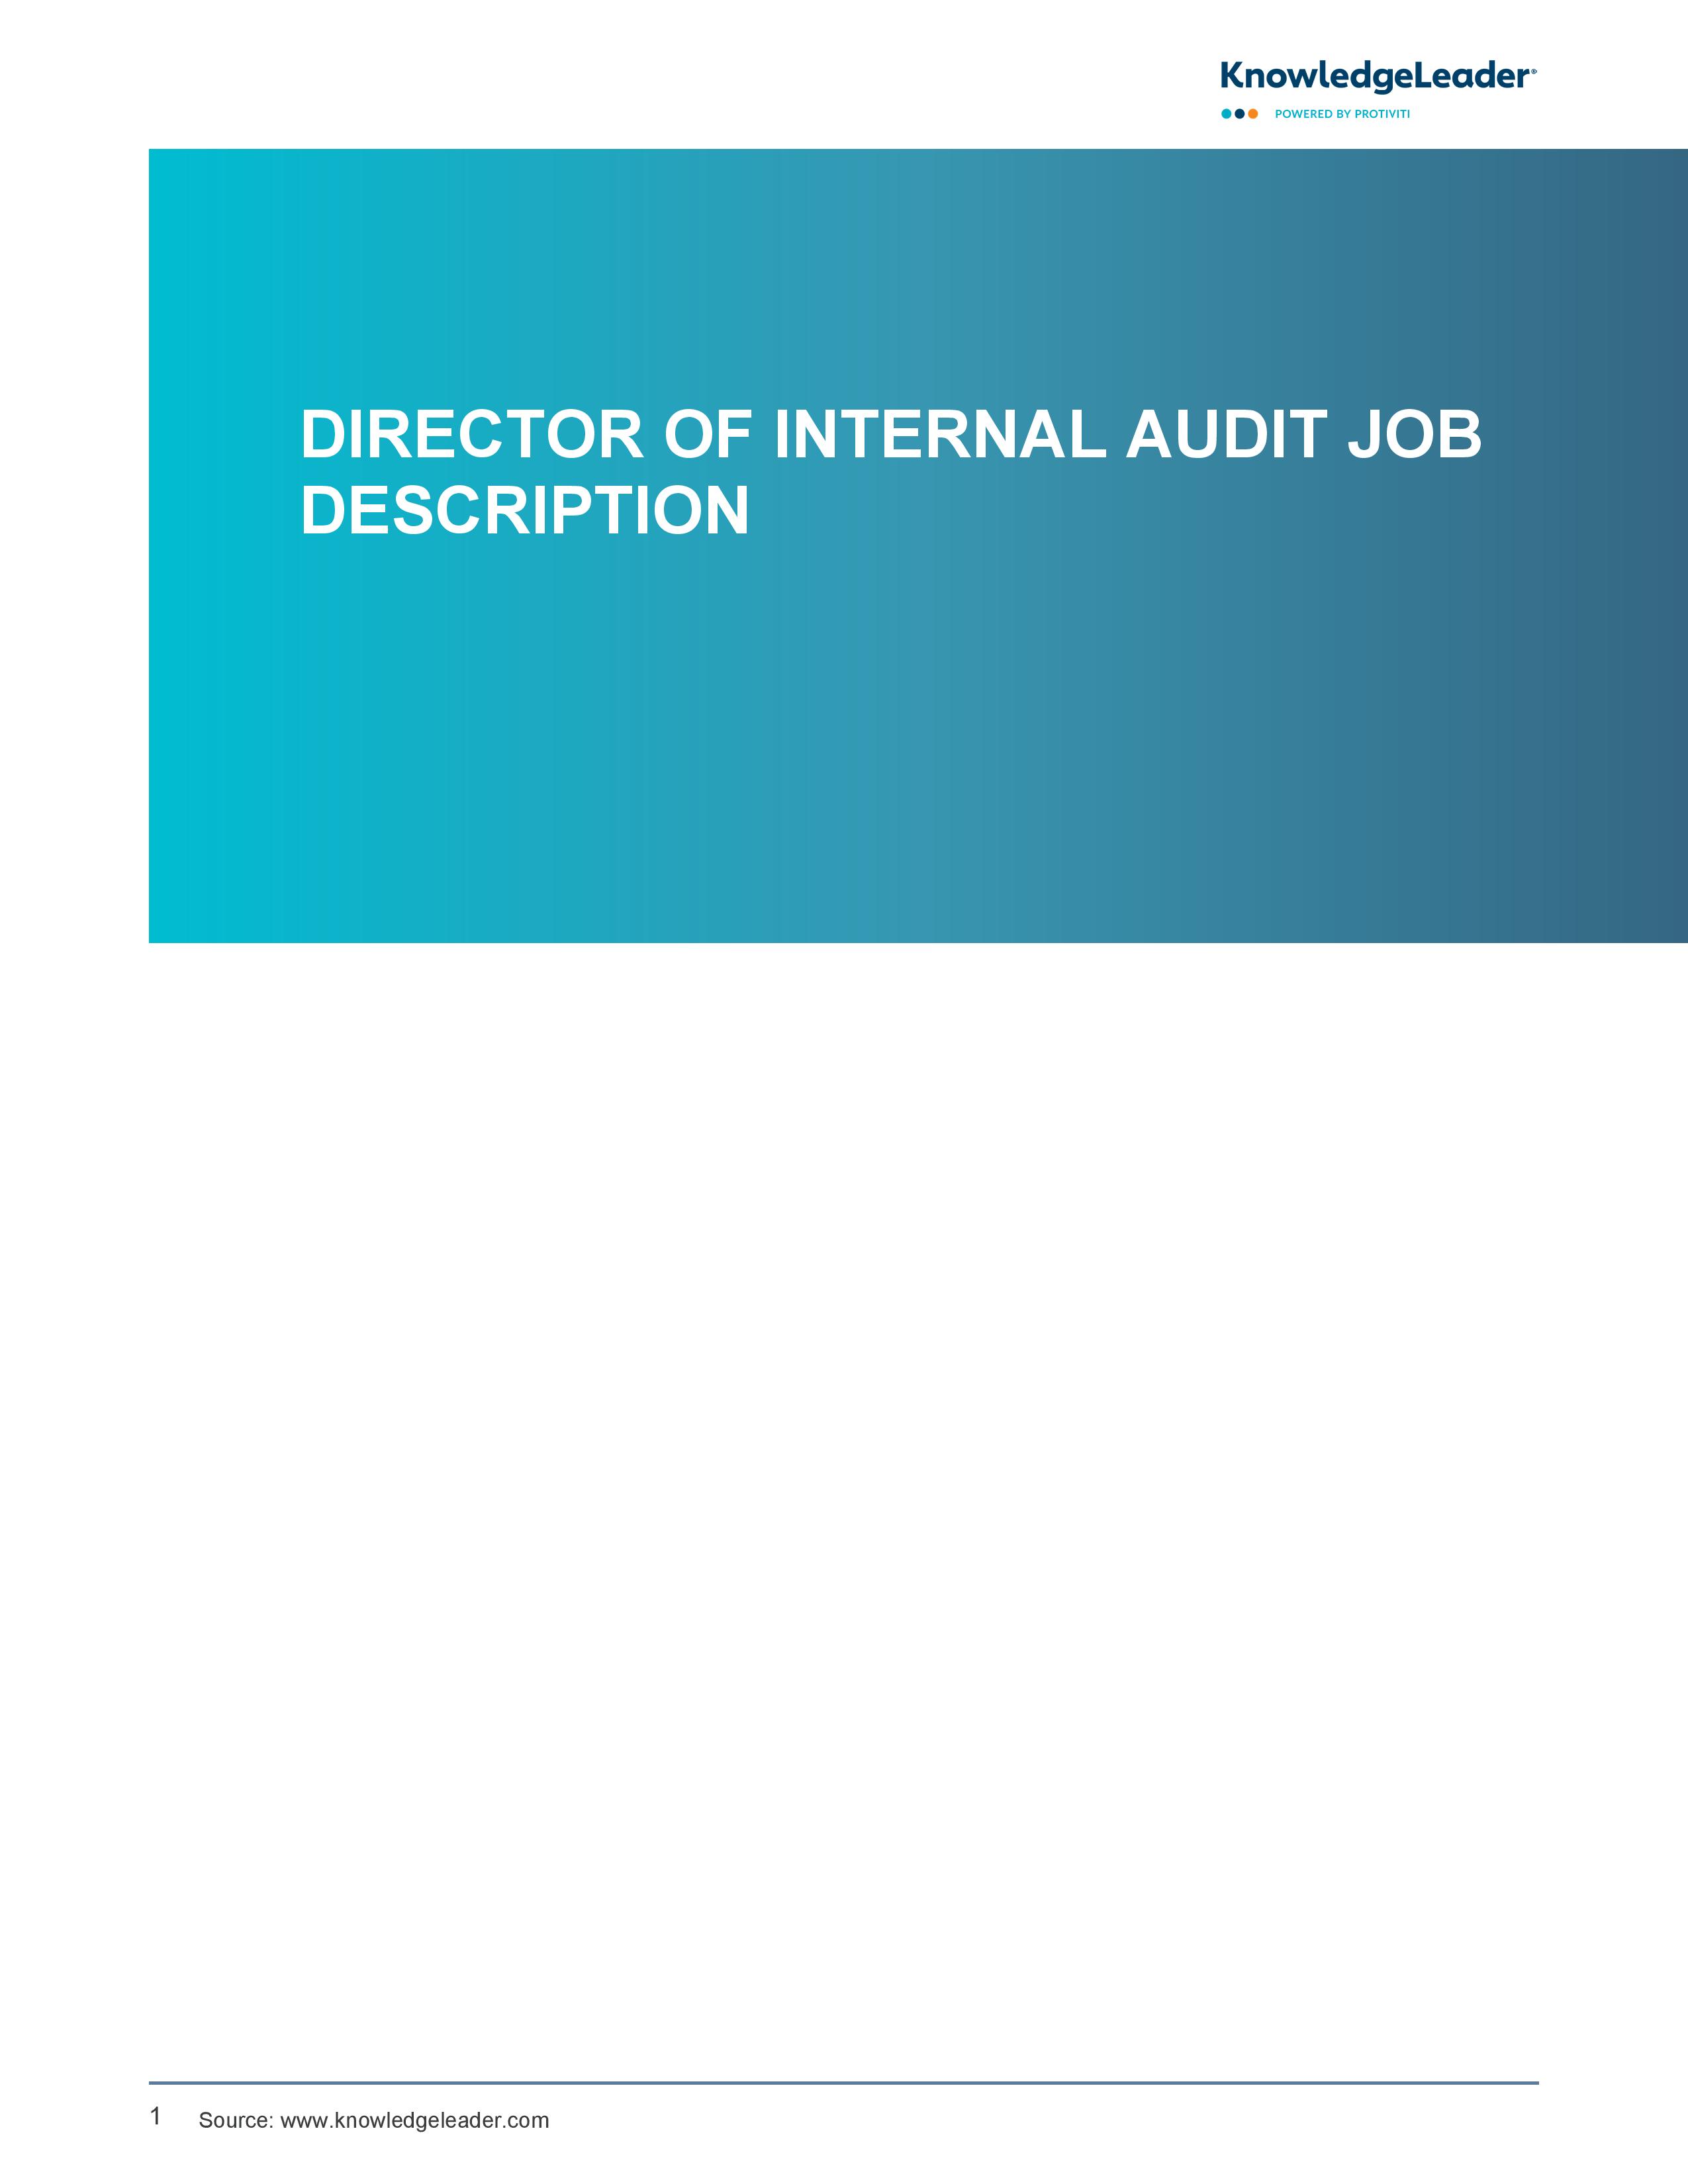 screenshot of the first page of Director of Internal Audit Job Description